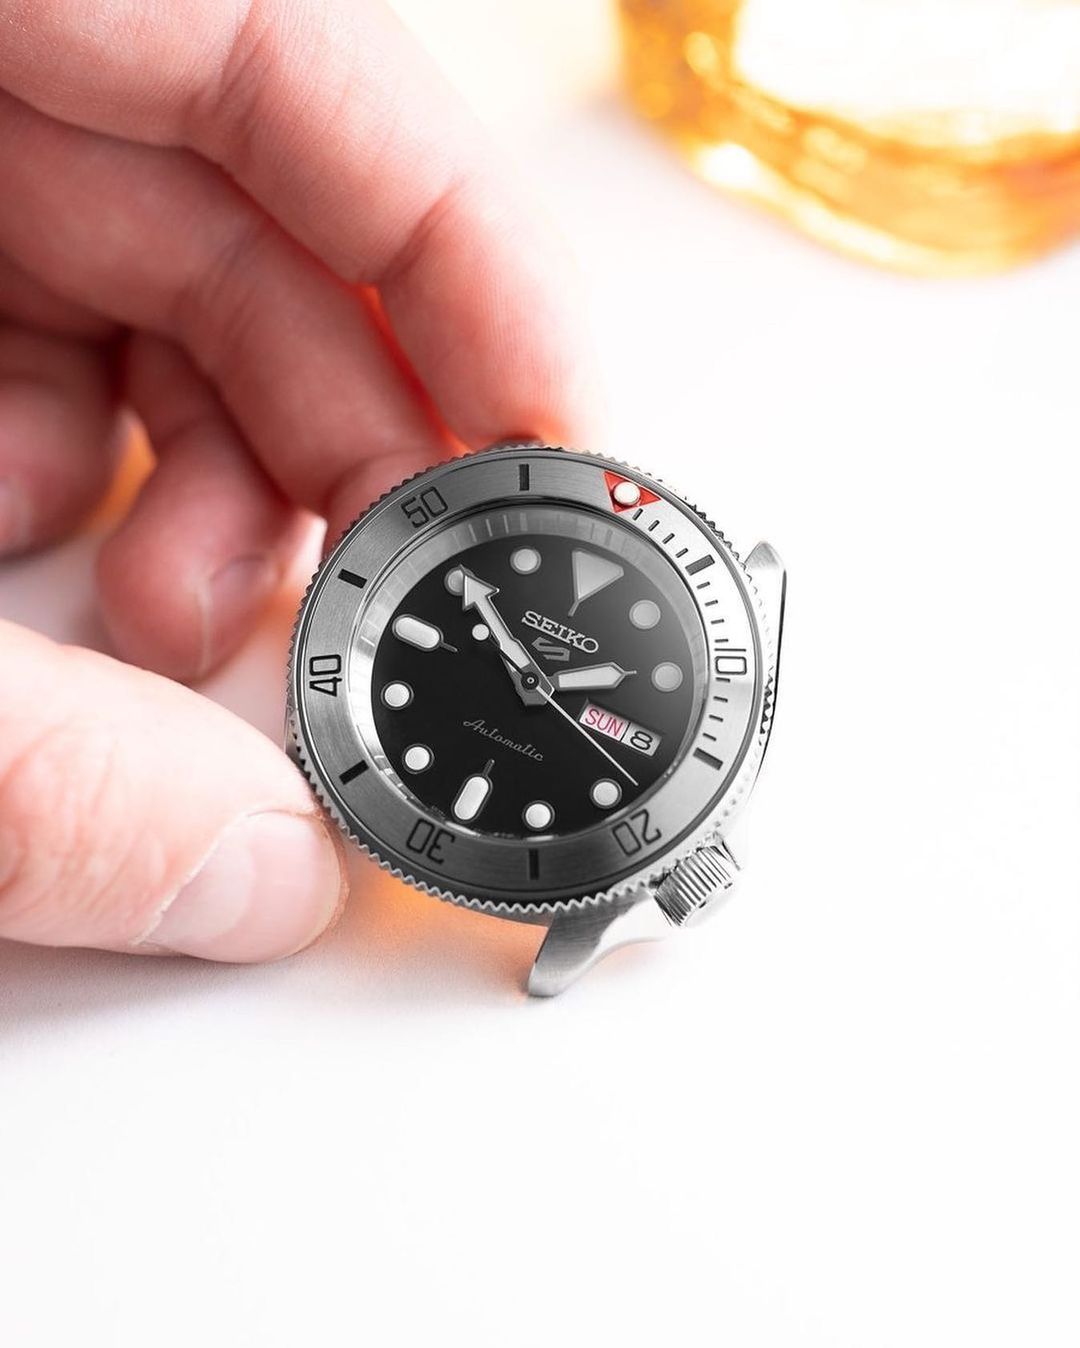 Sapphire Double Dome - No Bevel Edge - SKX007/SRPD - DLW WATCHES